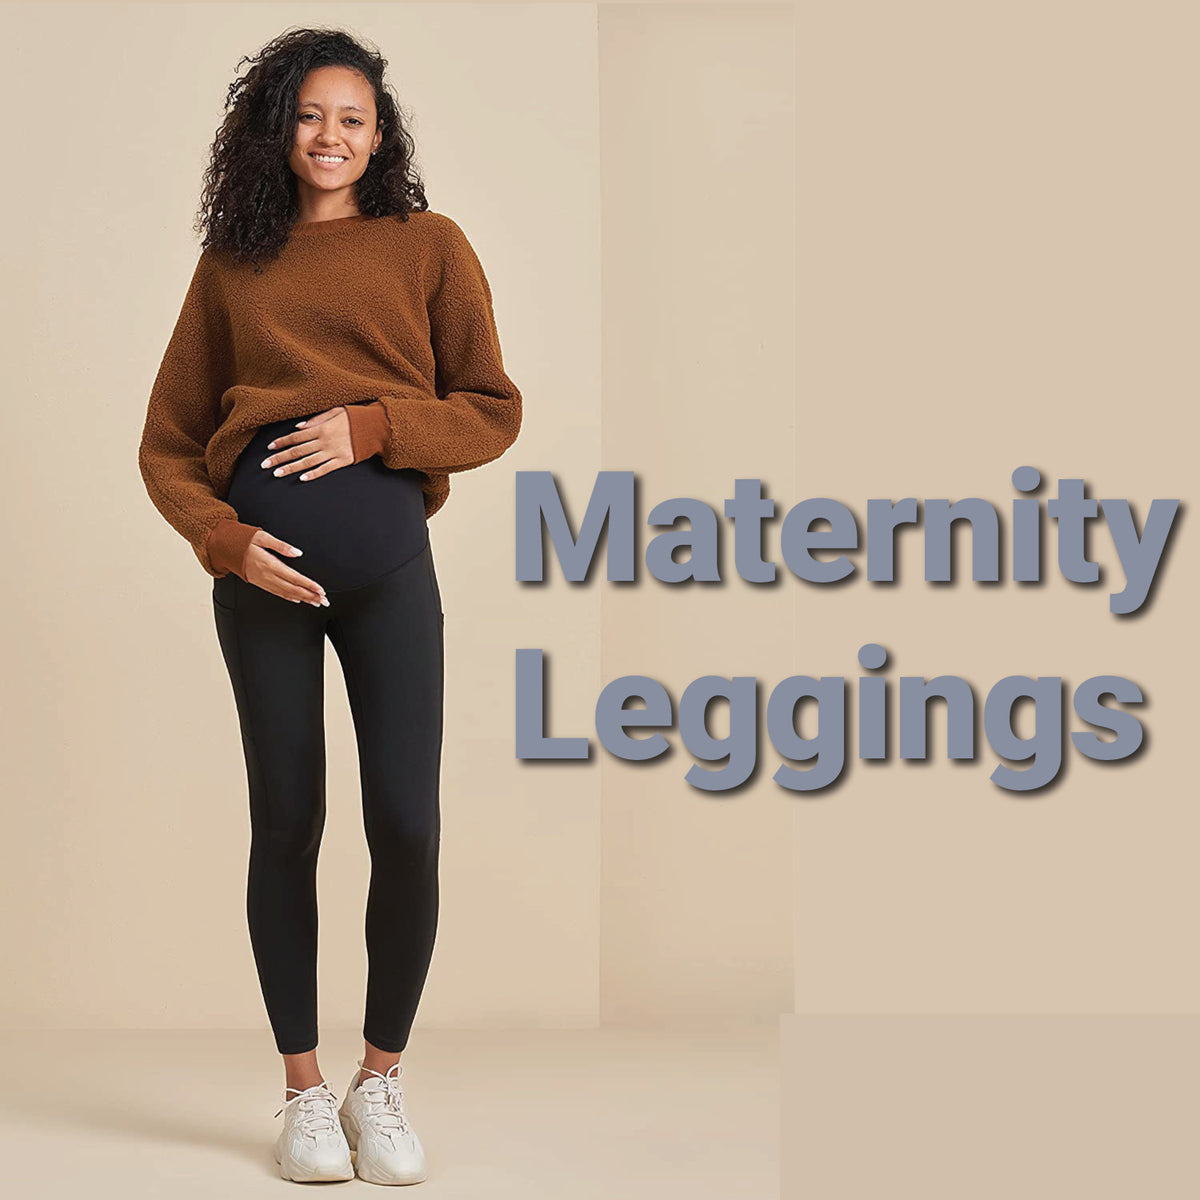 Womens Mint Thermal Lined Fleece Winter Fleece Lined Maternity Leggings  Warm And Transparent From Blossommg, $23.02 | DHgate.Com